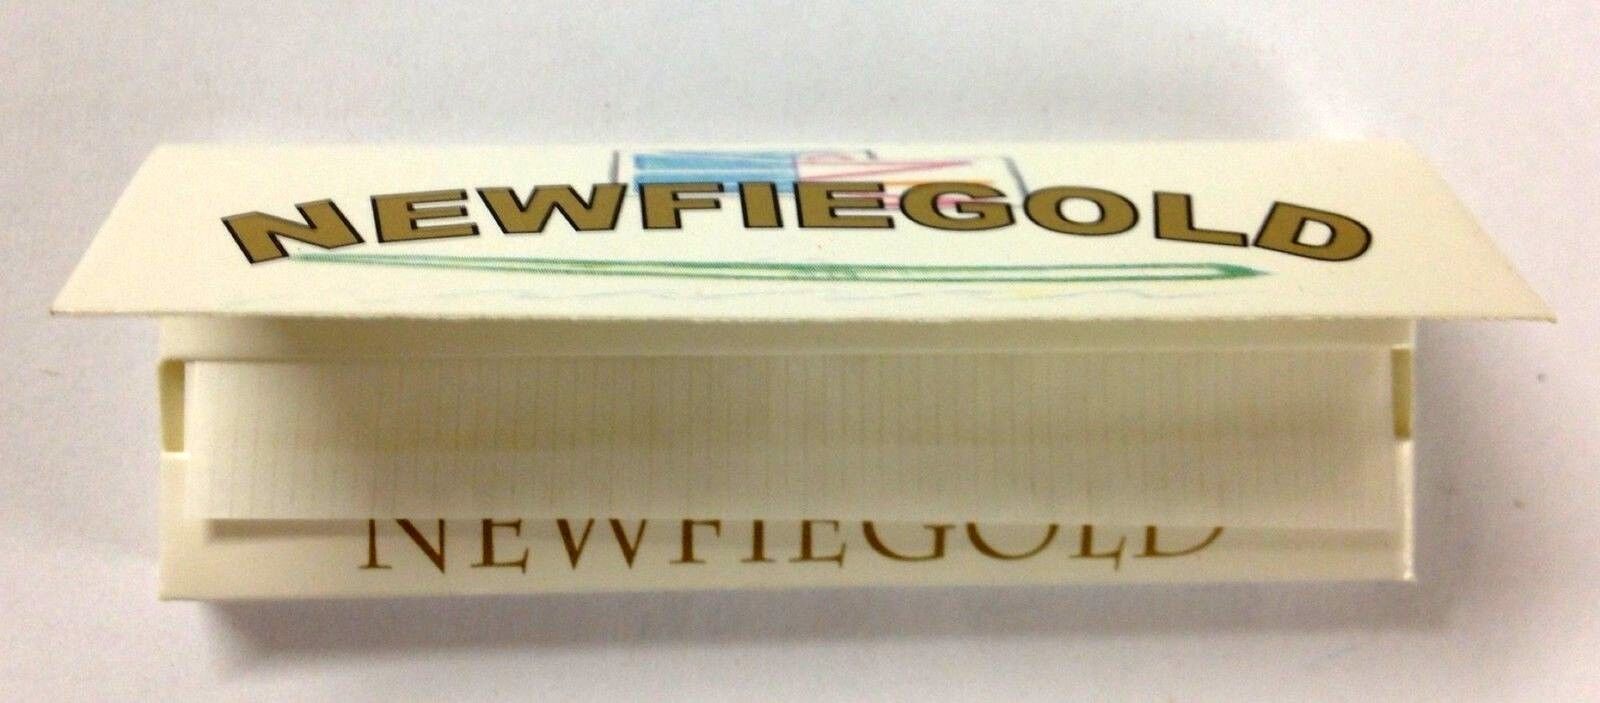 25 BOOKLETS OF 50 NEWFIEGOLD ROLLING PAPERS 1250 SHEETS